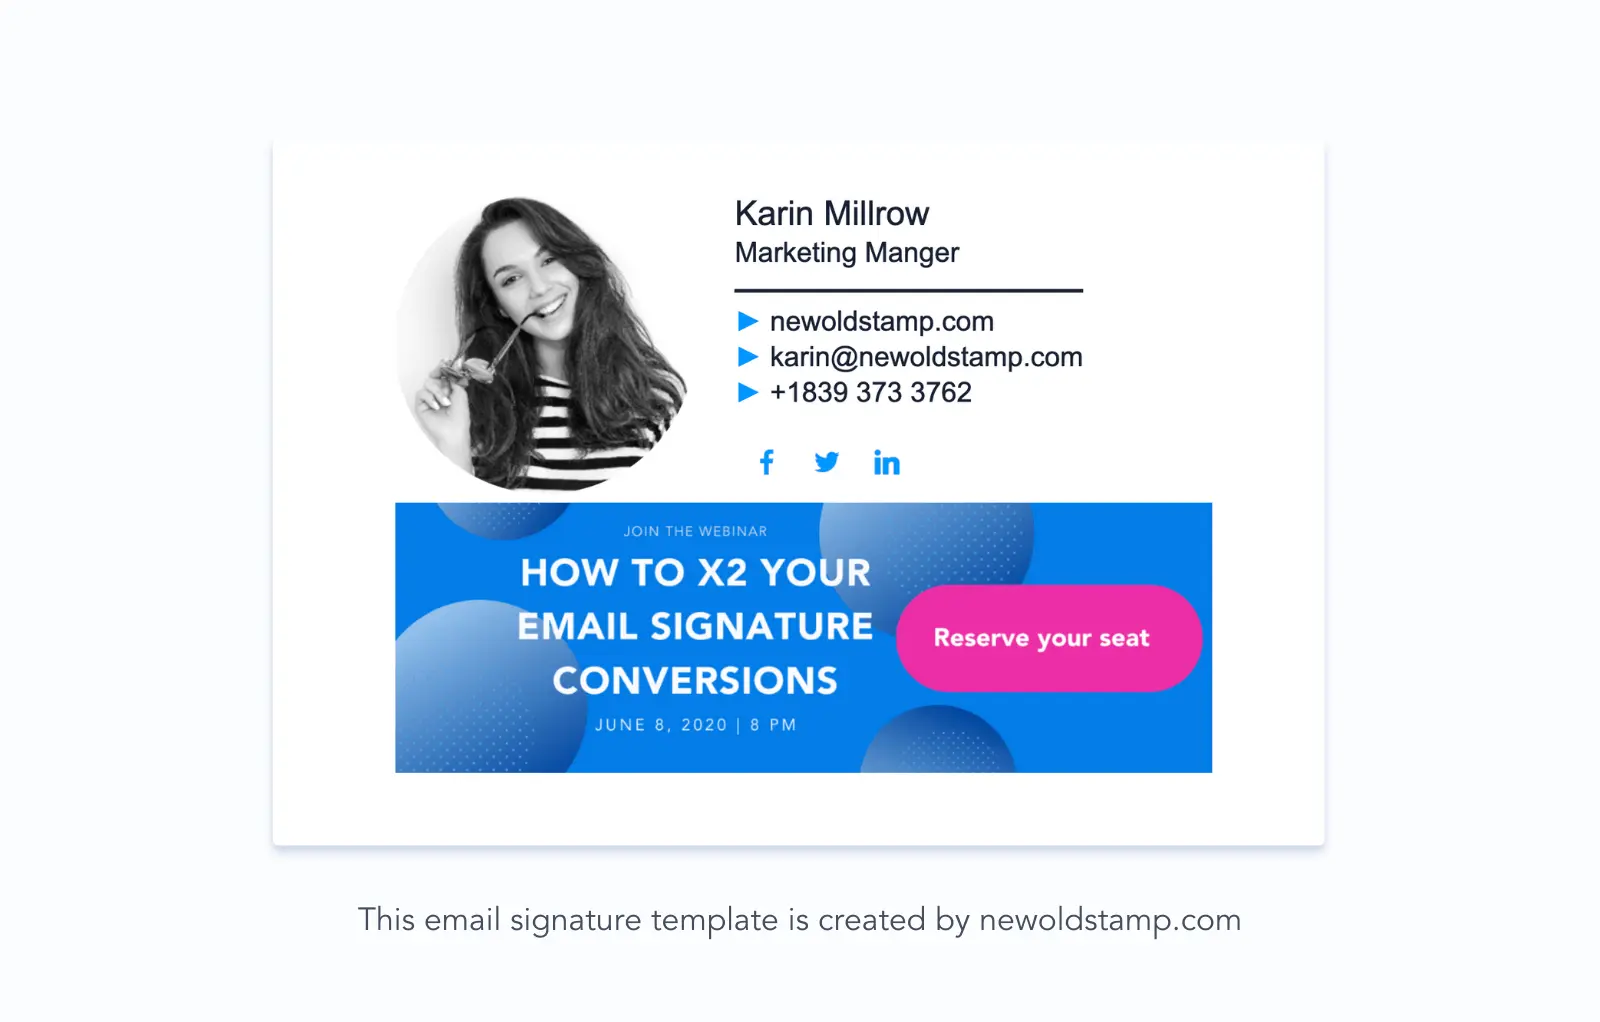 email signature marketing - event promotions